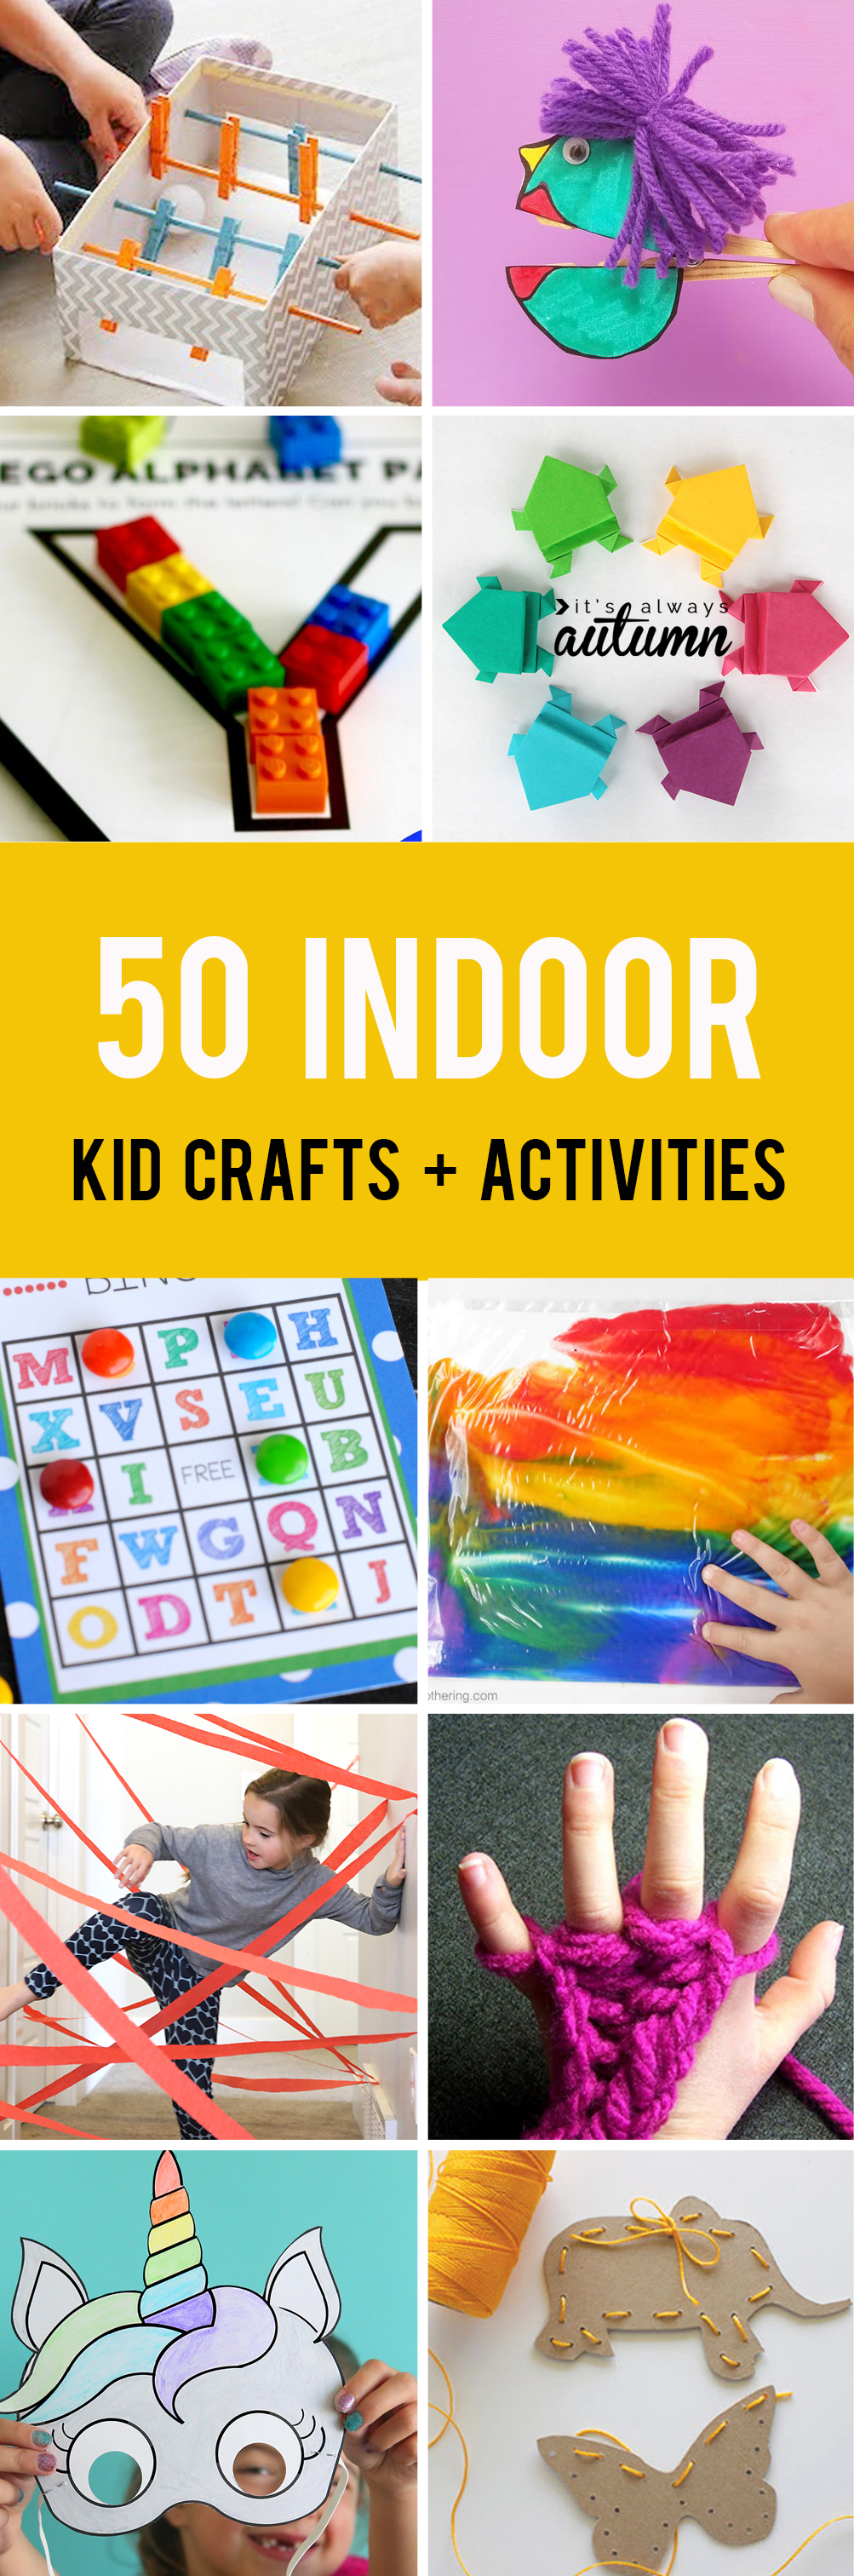 50 easy crafts and activities kids can do indoors! Perfect for cold or rainy days.